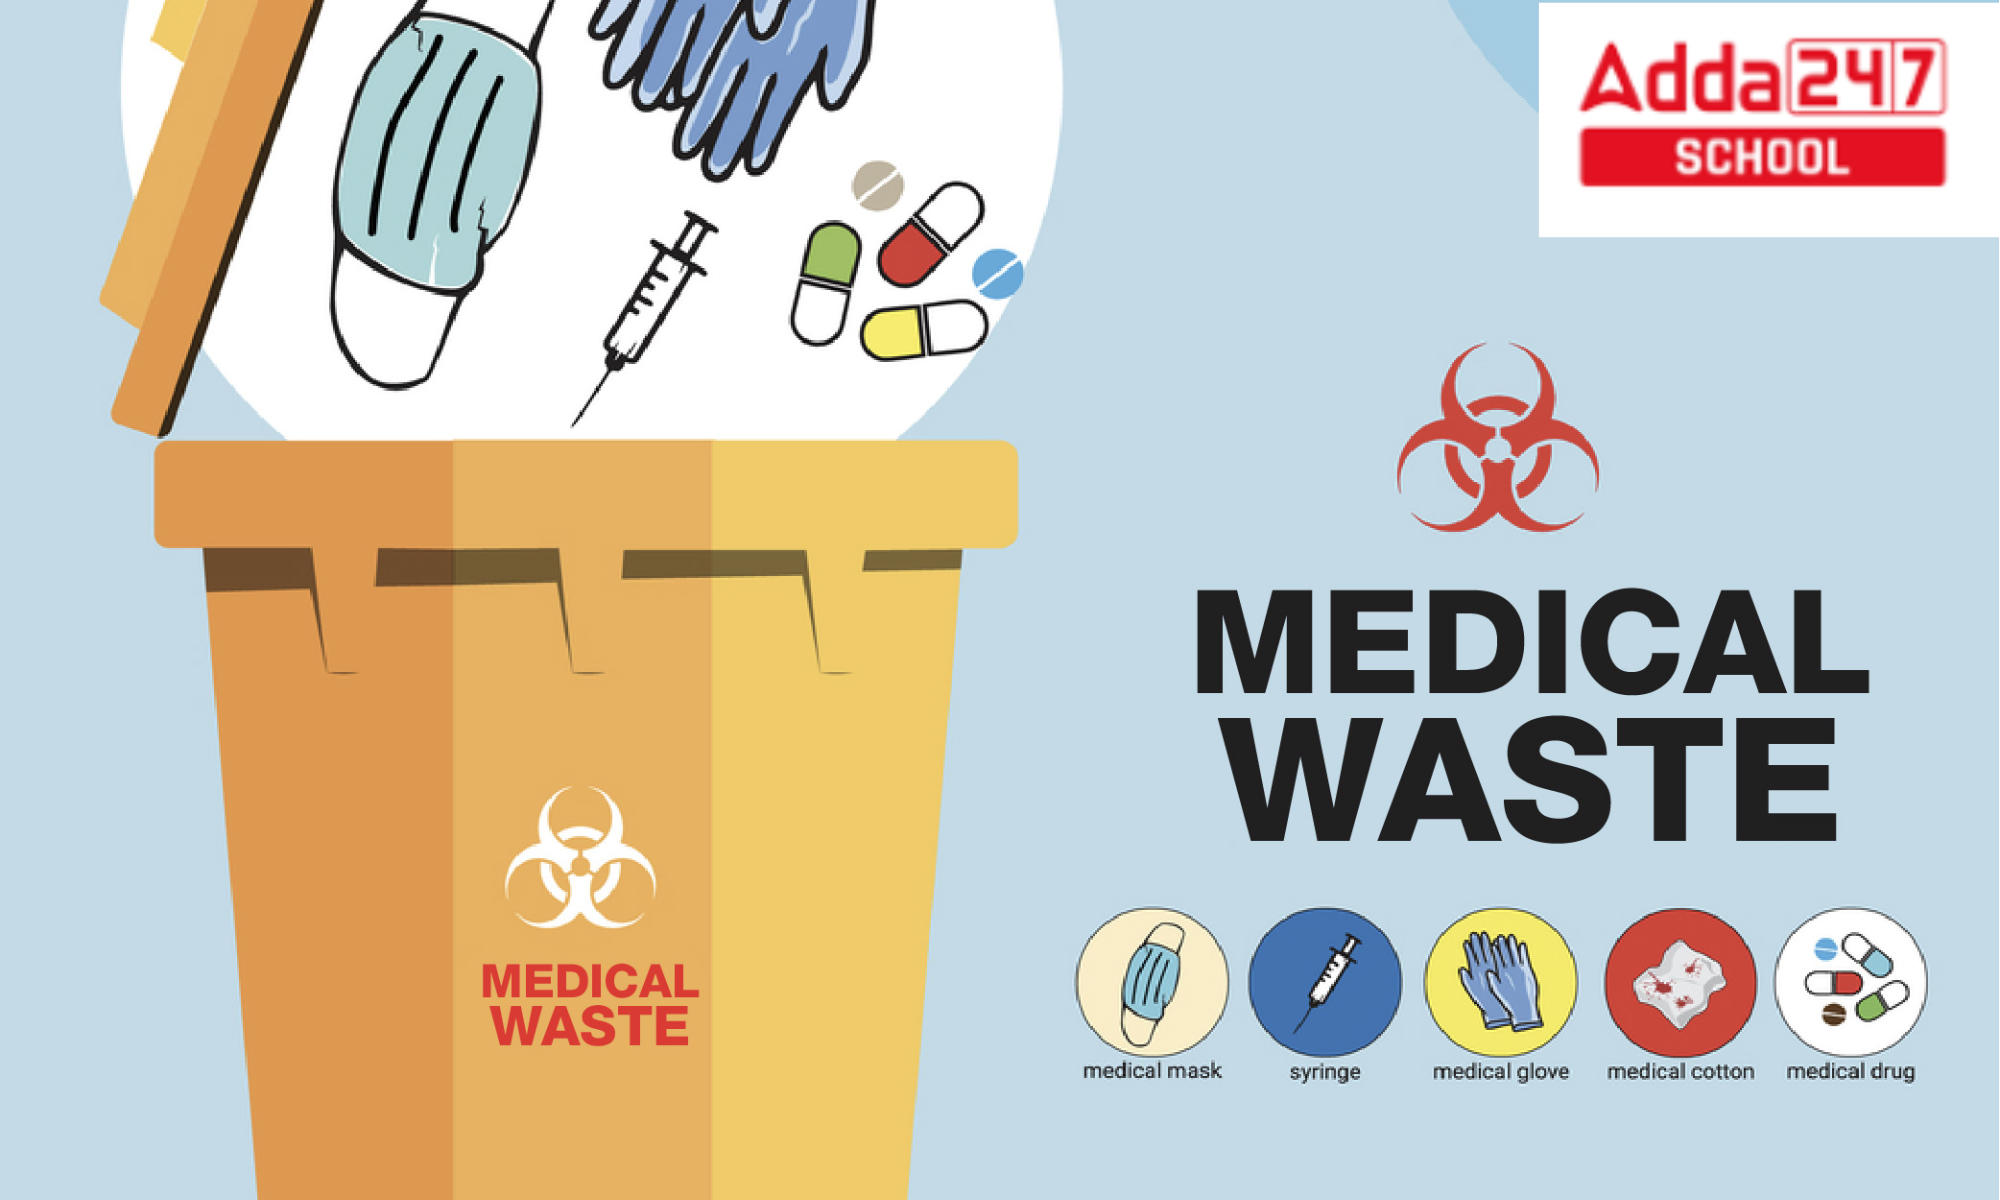 biomedical waste management assignment pdf